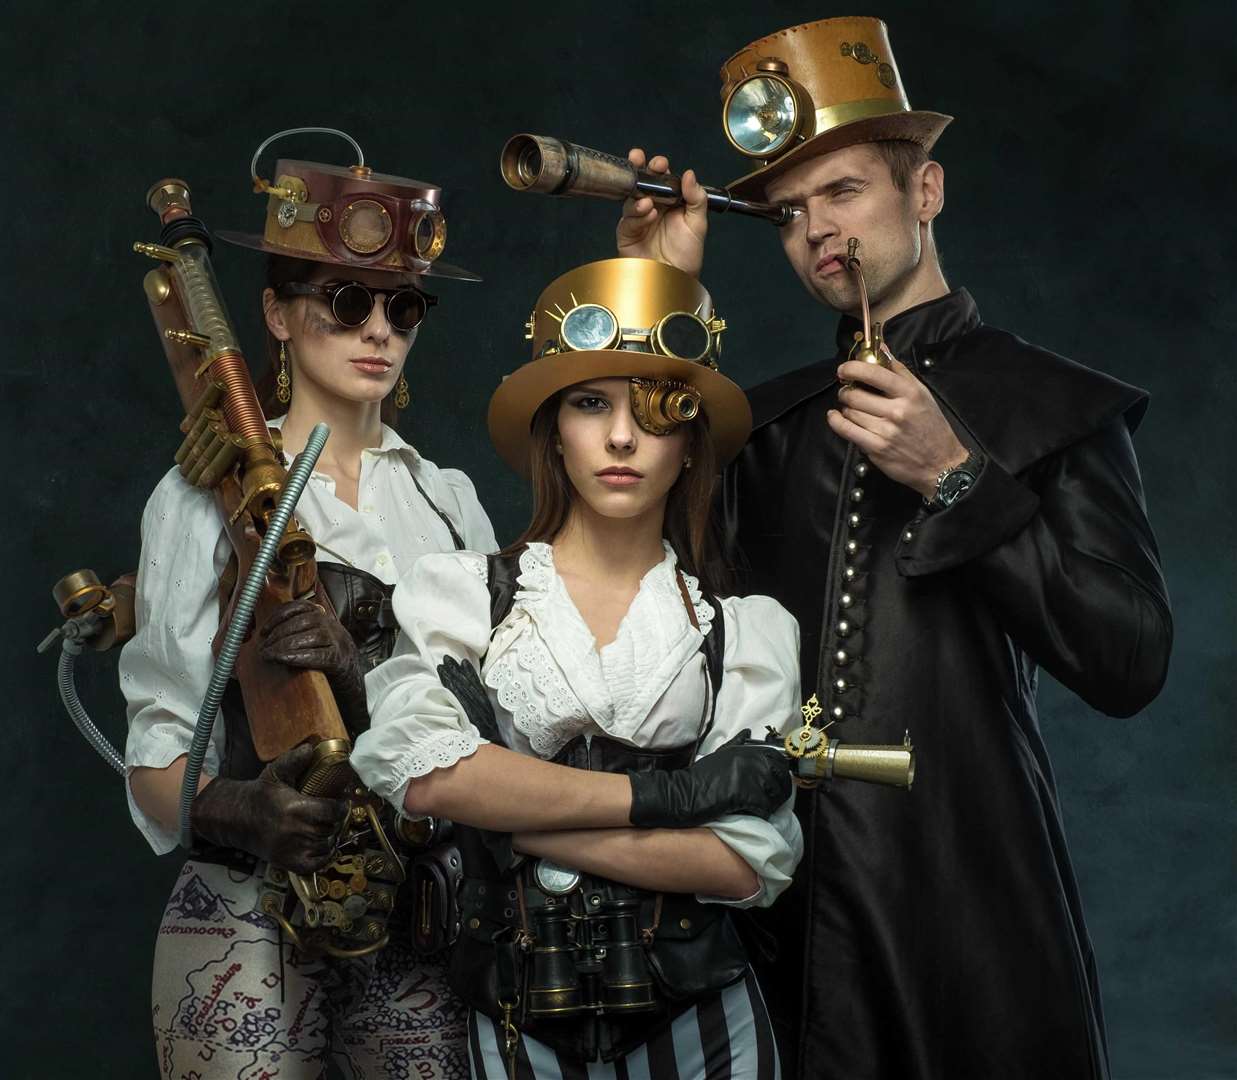 Immerse yourself in the world of steampunks at Maidstone Museum